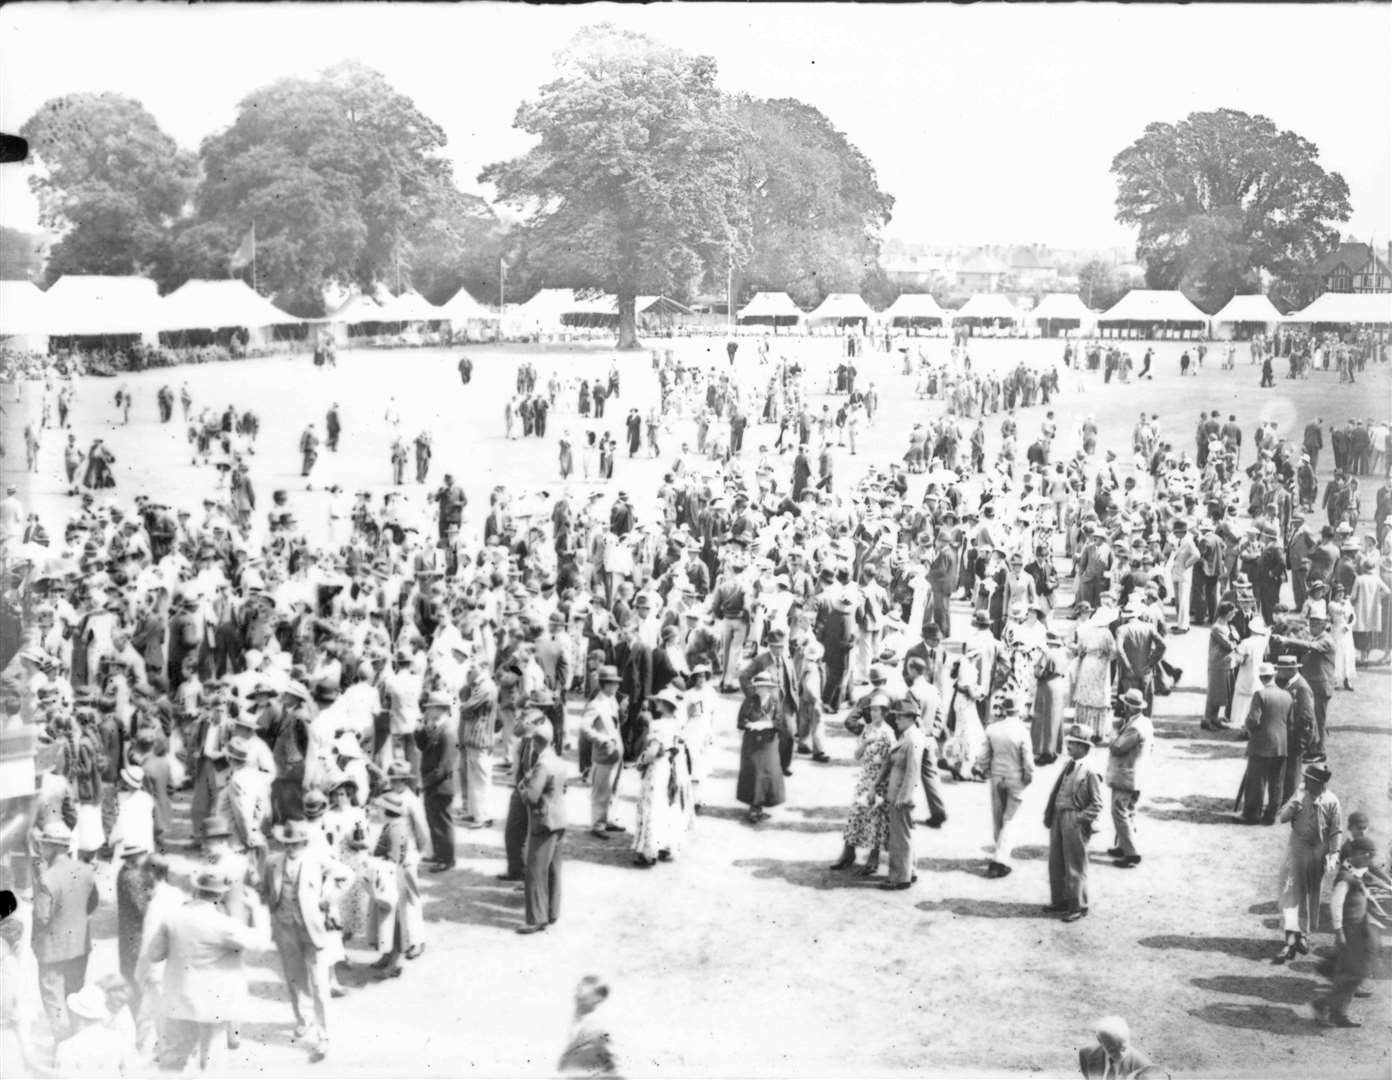 The Cricket Week at the St Lawrence Ground, held the first week in August, remains a popular social event. Pictured here is the 1933 iteration. Picture: 'Images of Canterbury' book page 112